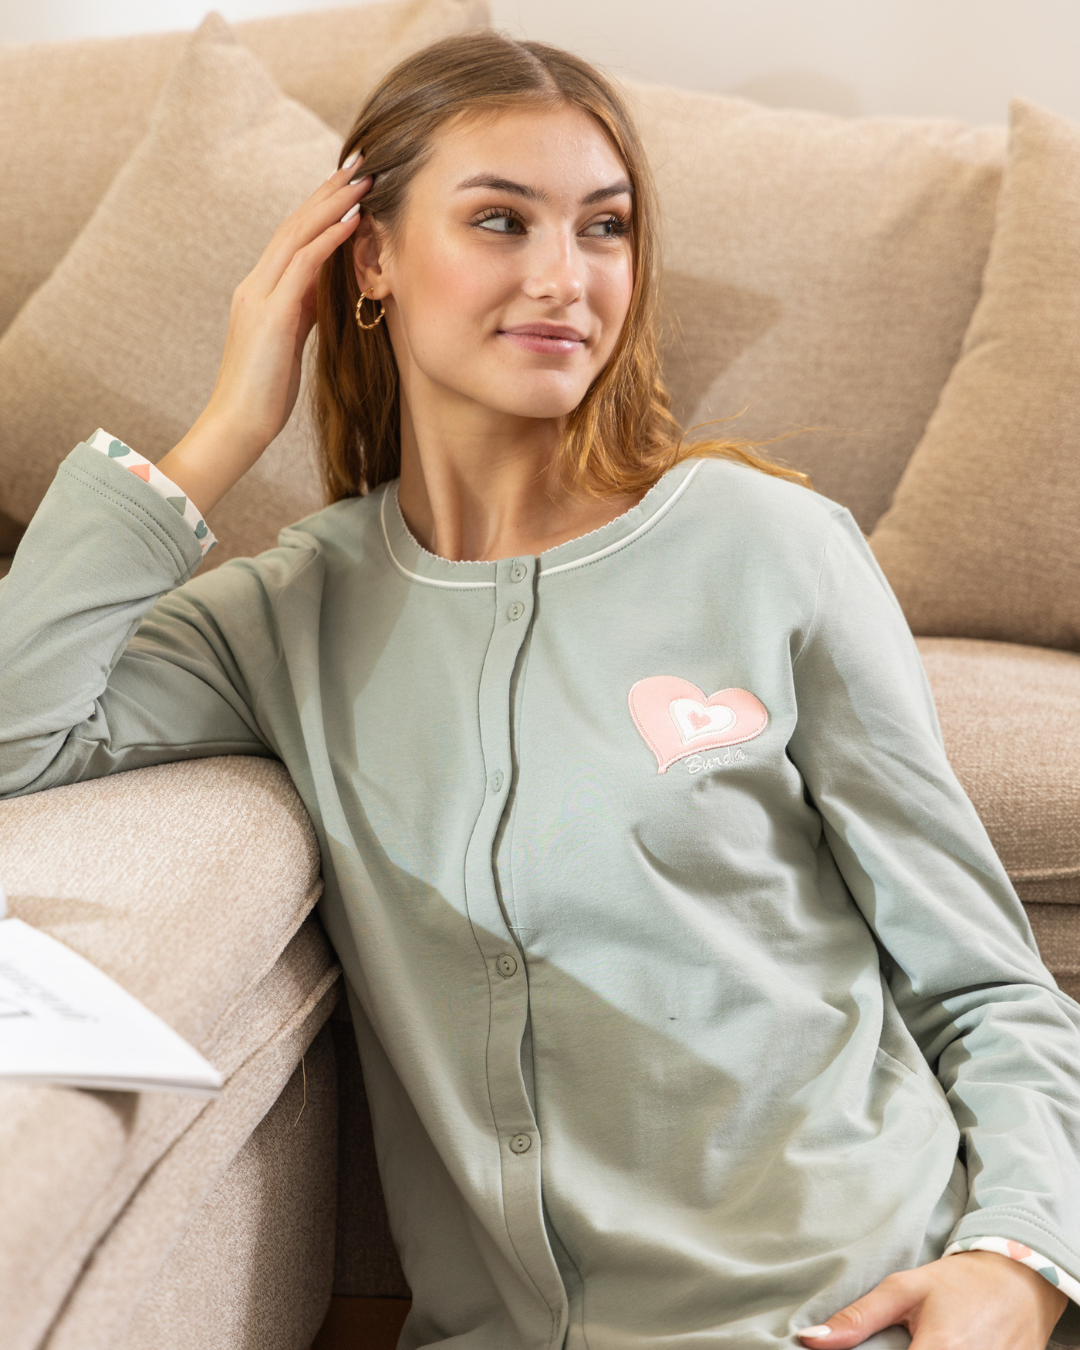 hearts Women's pajamas with long sleeves and open buttons, printed and embroidered with hearts